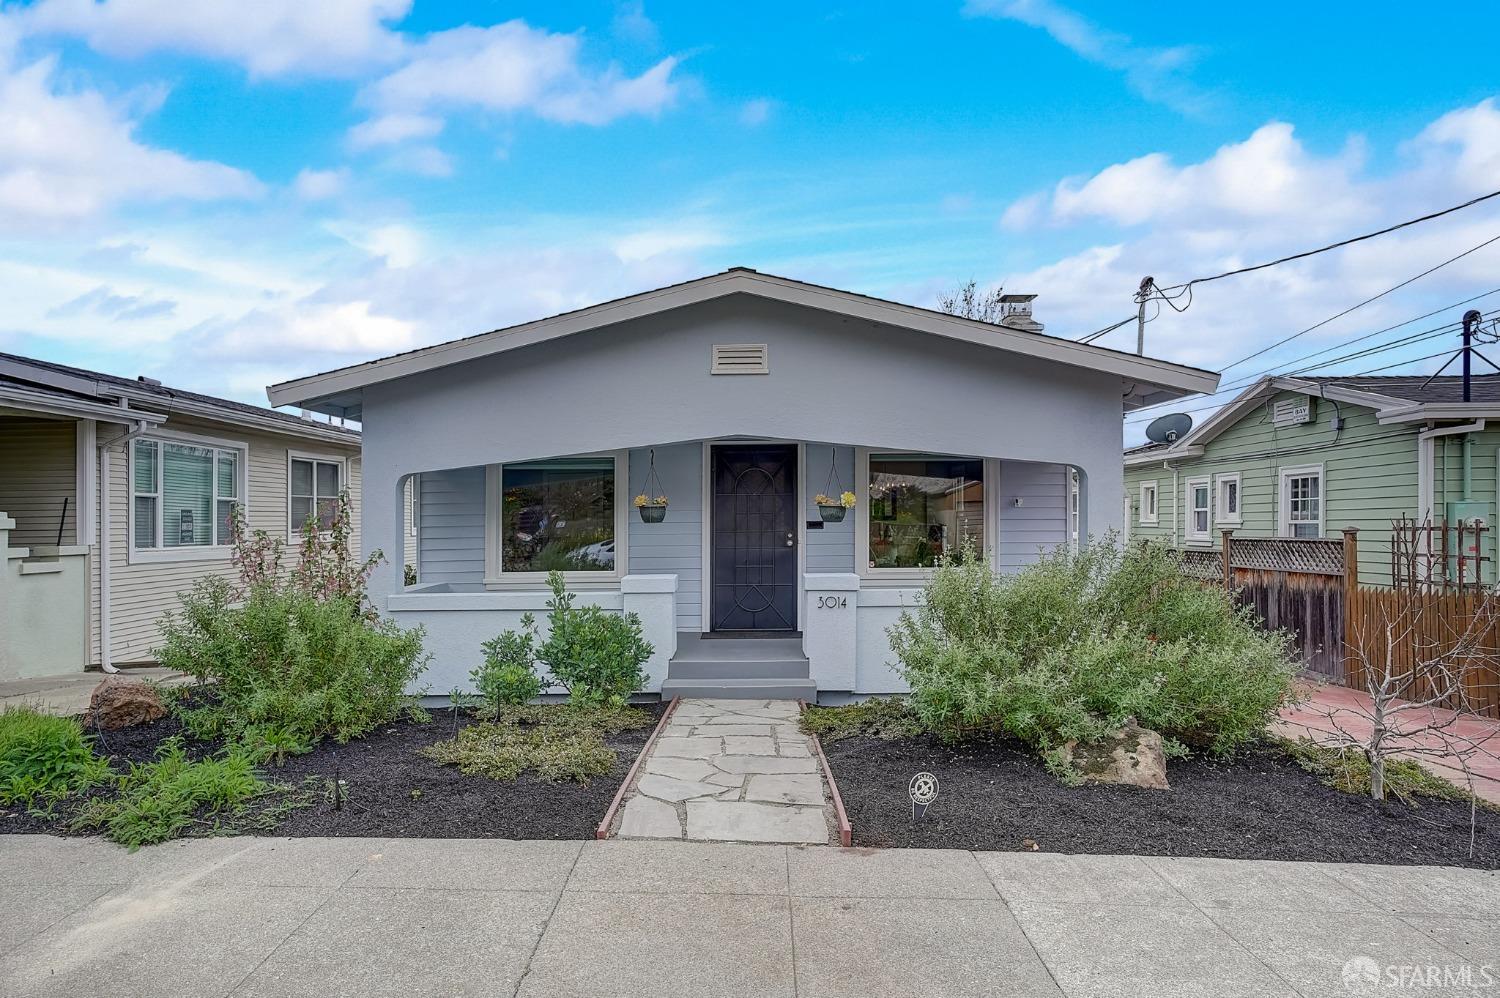 Photo of 3014 Morcom Ave in Oakland, CA